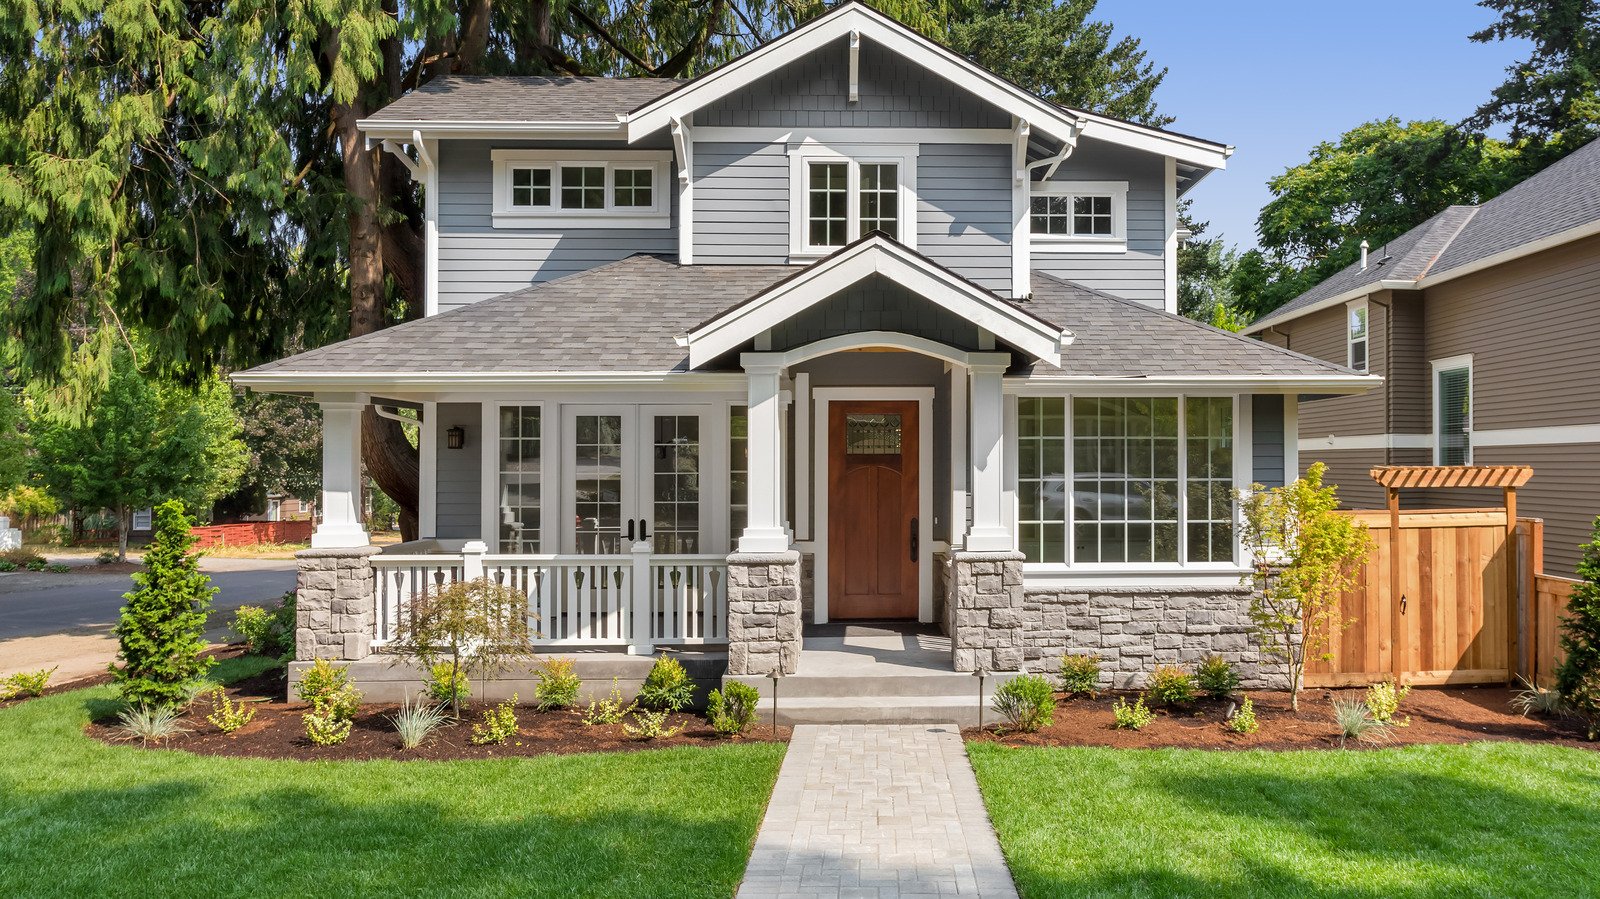 Exterior House Colors You Should Avoid Using At All Costs